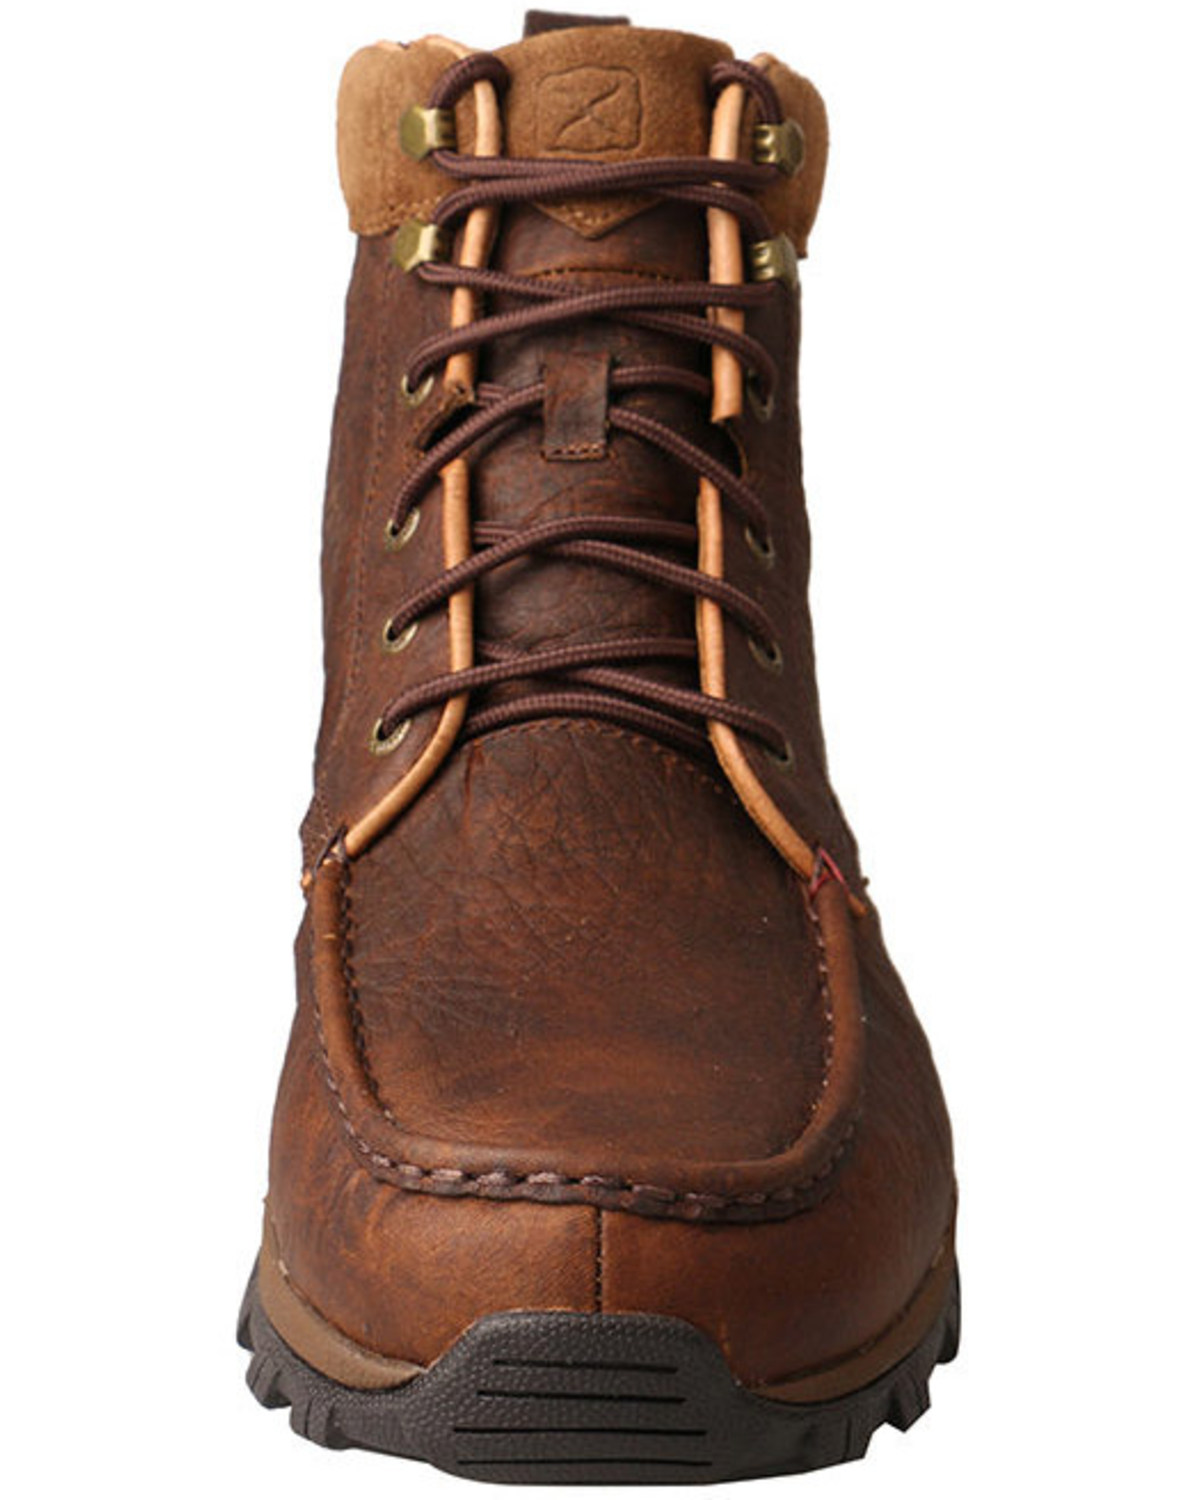 Twisted X Men's Insulated Casual Hiker Boots - Composite Toe | Boot Barn